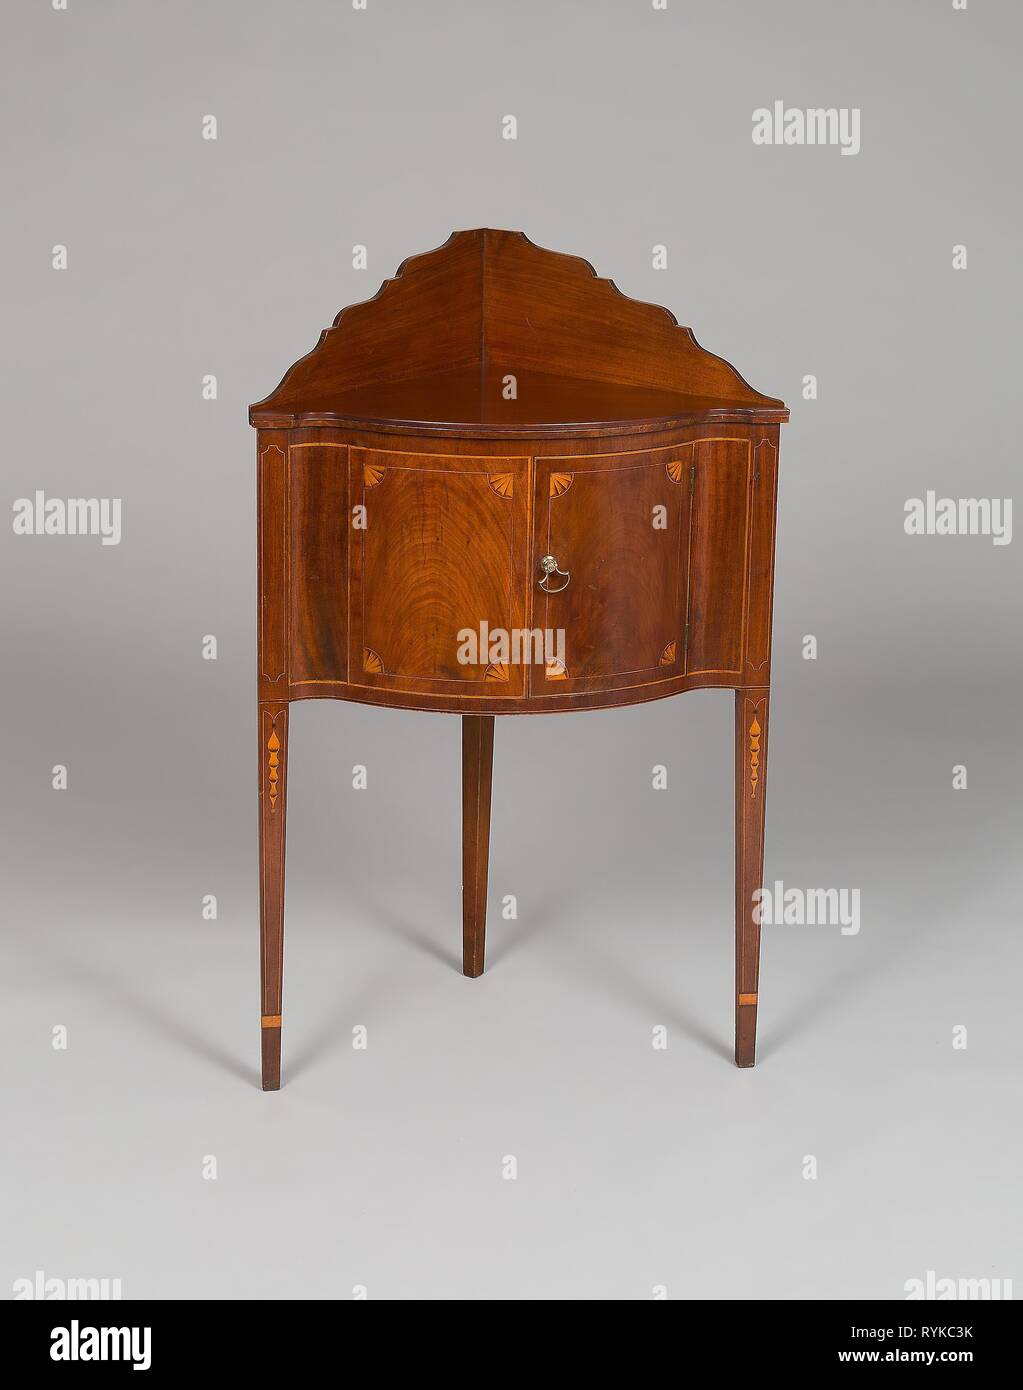 Corner Basin Stand. American; New York or possibly Connecticut. Date: 1790-1800. Dimensions: 94.3 × 59.1 × 41.9 cm (37 1/8 × 23 1/4 × 16 1/2 in.). Mahogany with white pine and cherry, and light-colored inlays. Origin: Connecticut. Museum: The Chicago Art Institute, Chicago, USA. Stock Photo